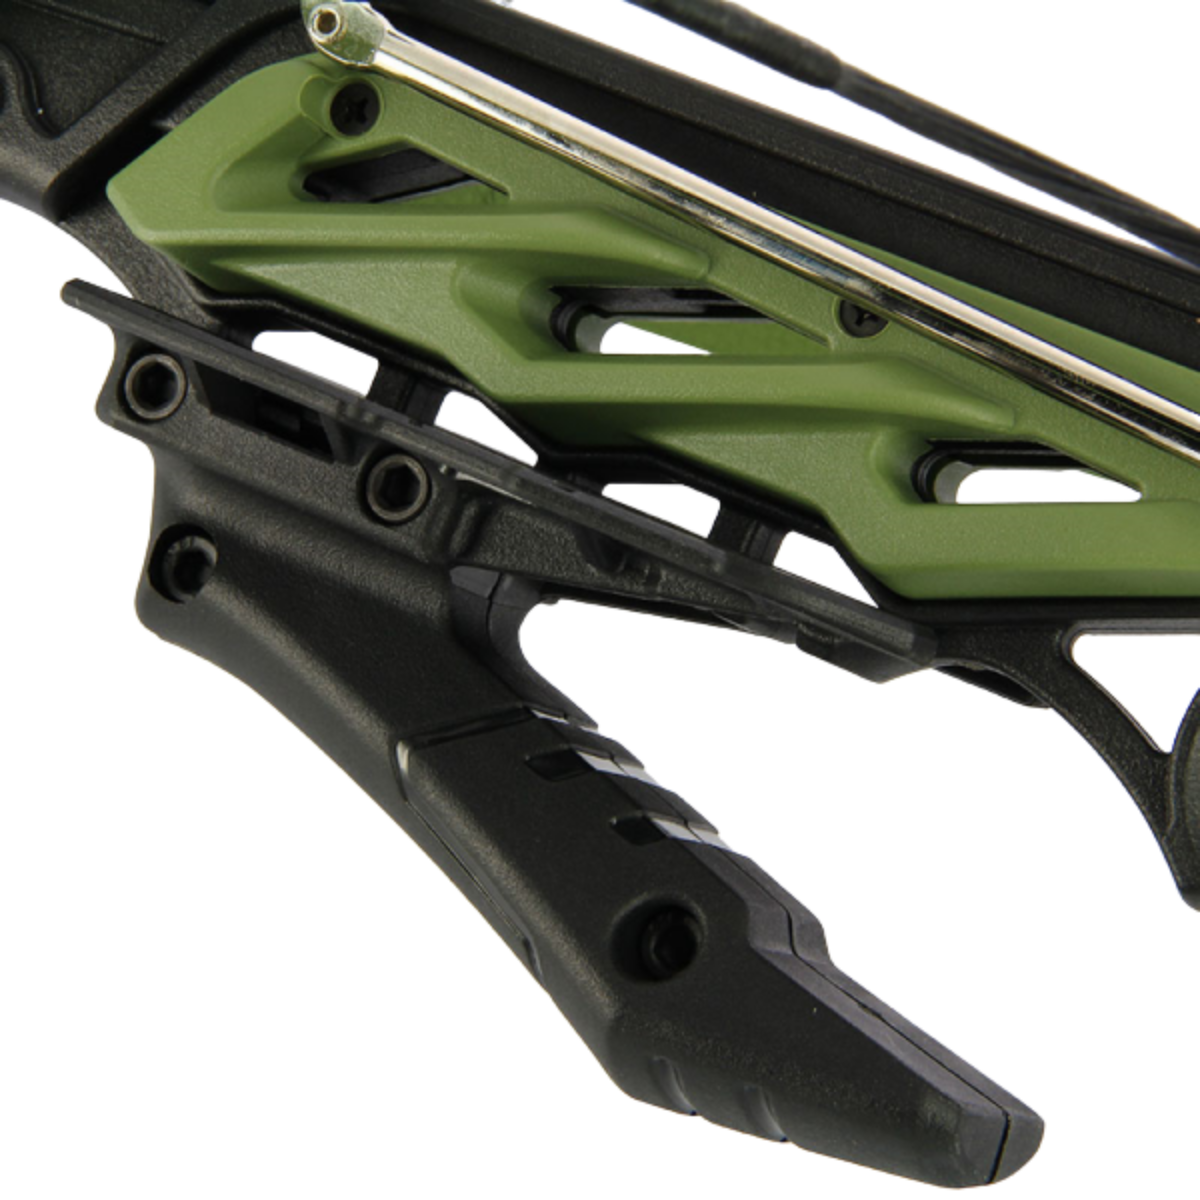 Anglo Arms Mantis 80lb Self Cocking Pistol Crossbow - Fast UK Shipping | Tactical Archery UK